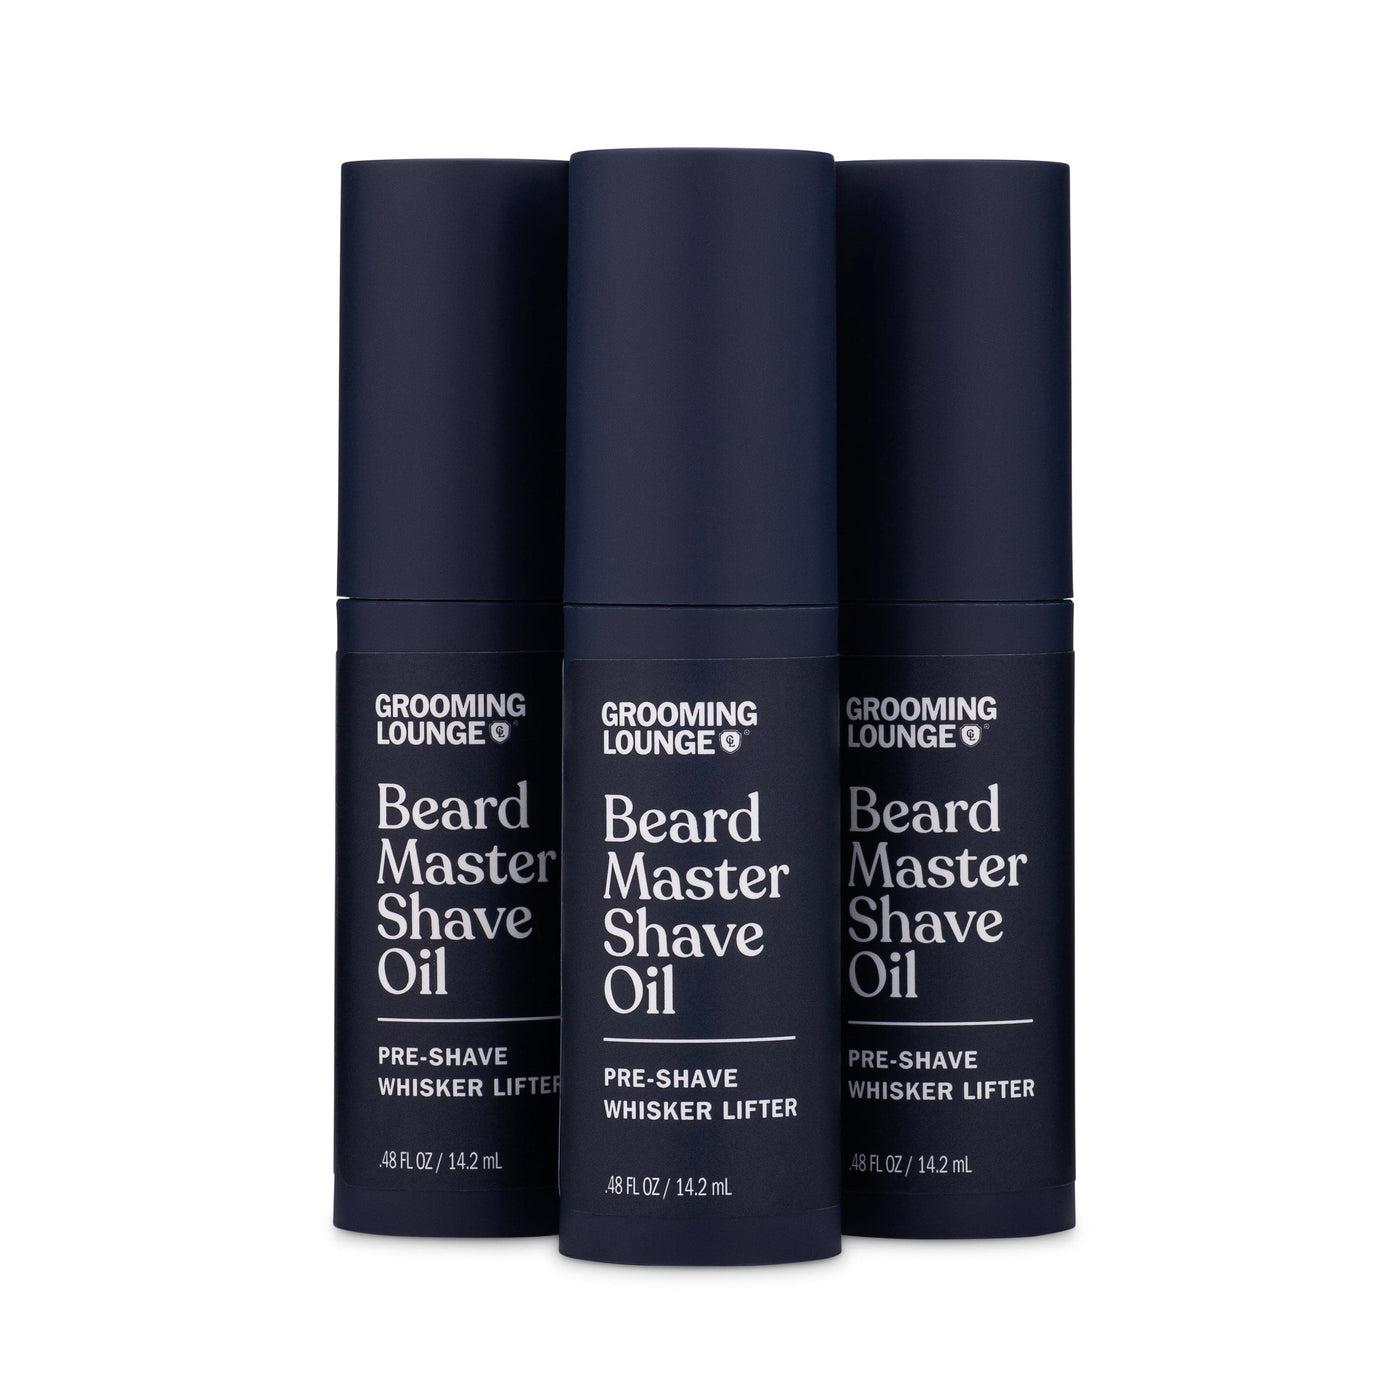 Grooming Lounge Beard Master Shave Oil 3 Pack (Save $10) by Grooming Lounge